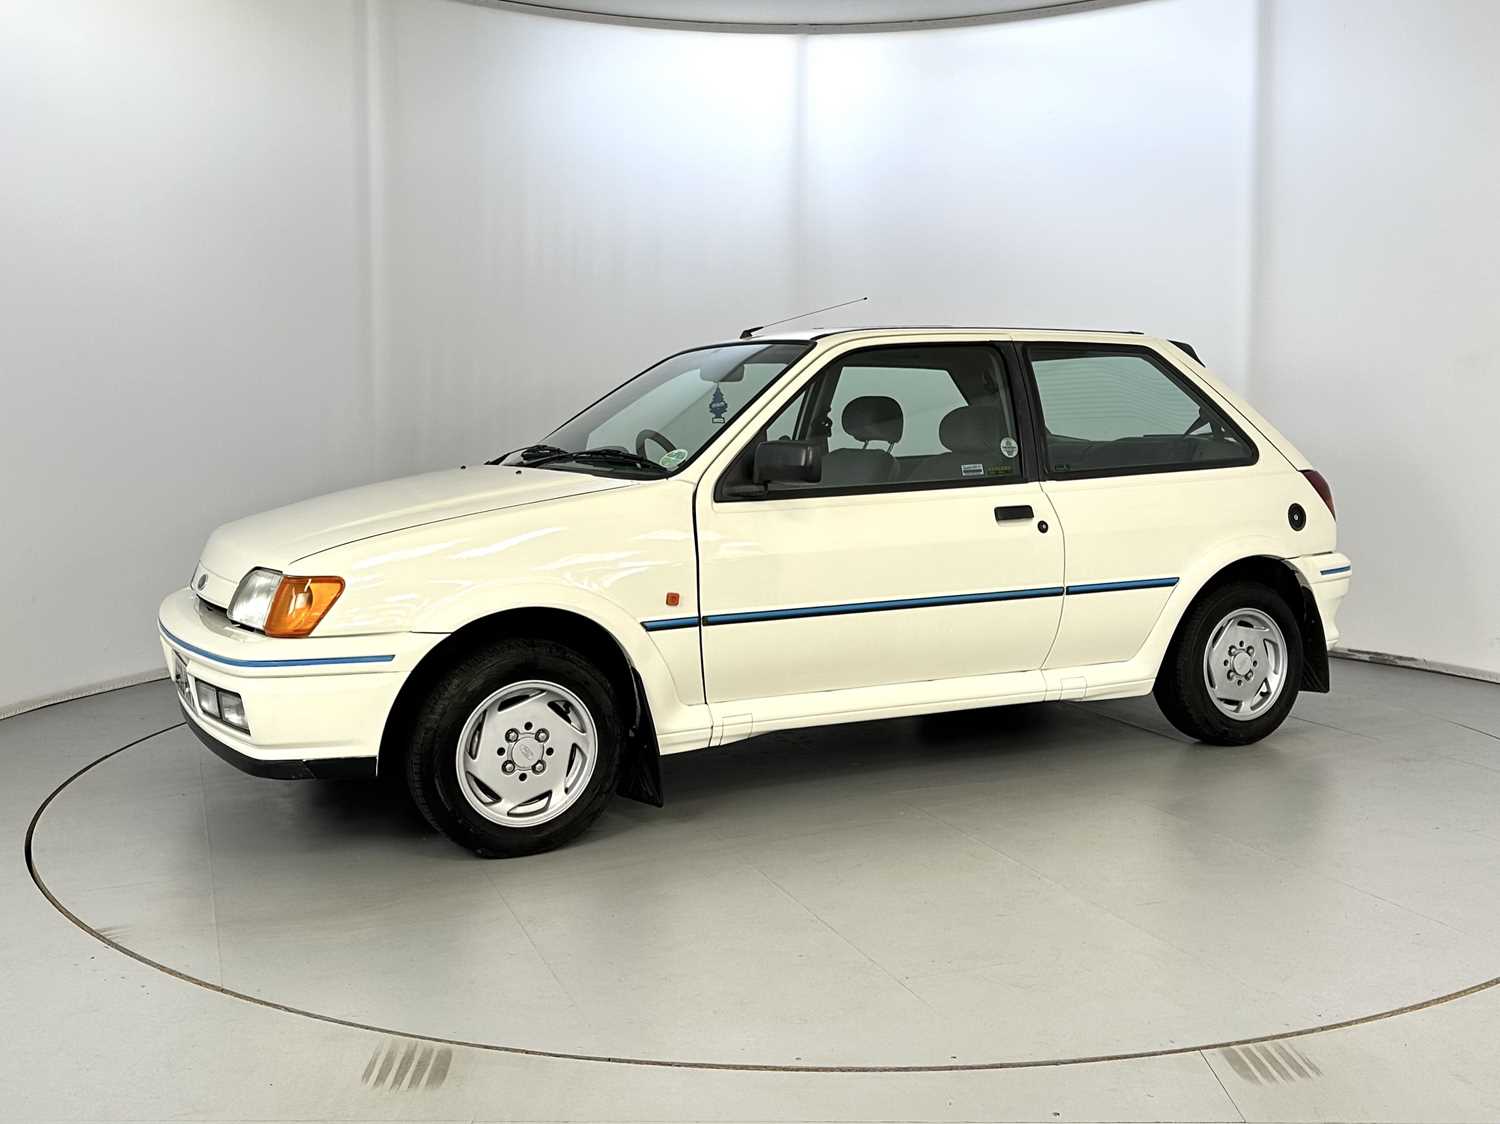 1991 Ford Fiesta XR2i - Image 4 of 30